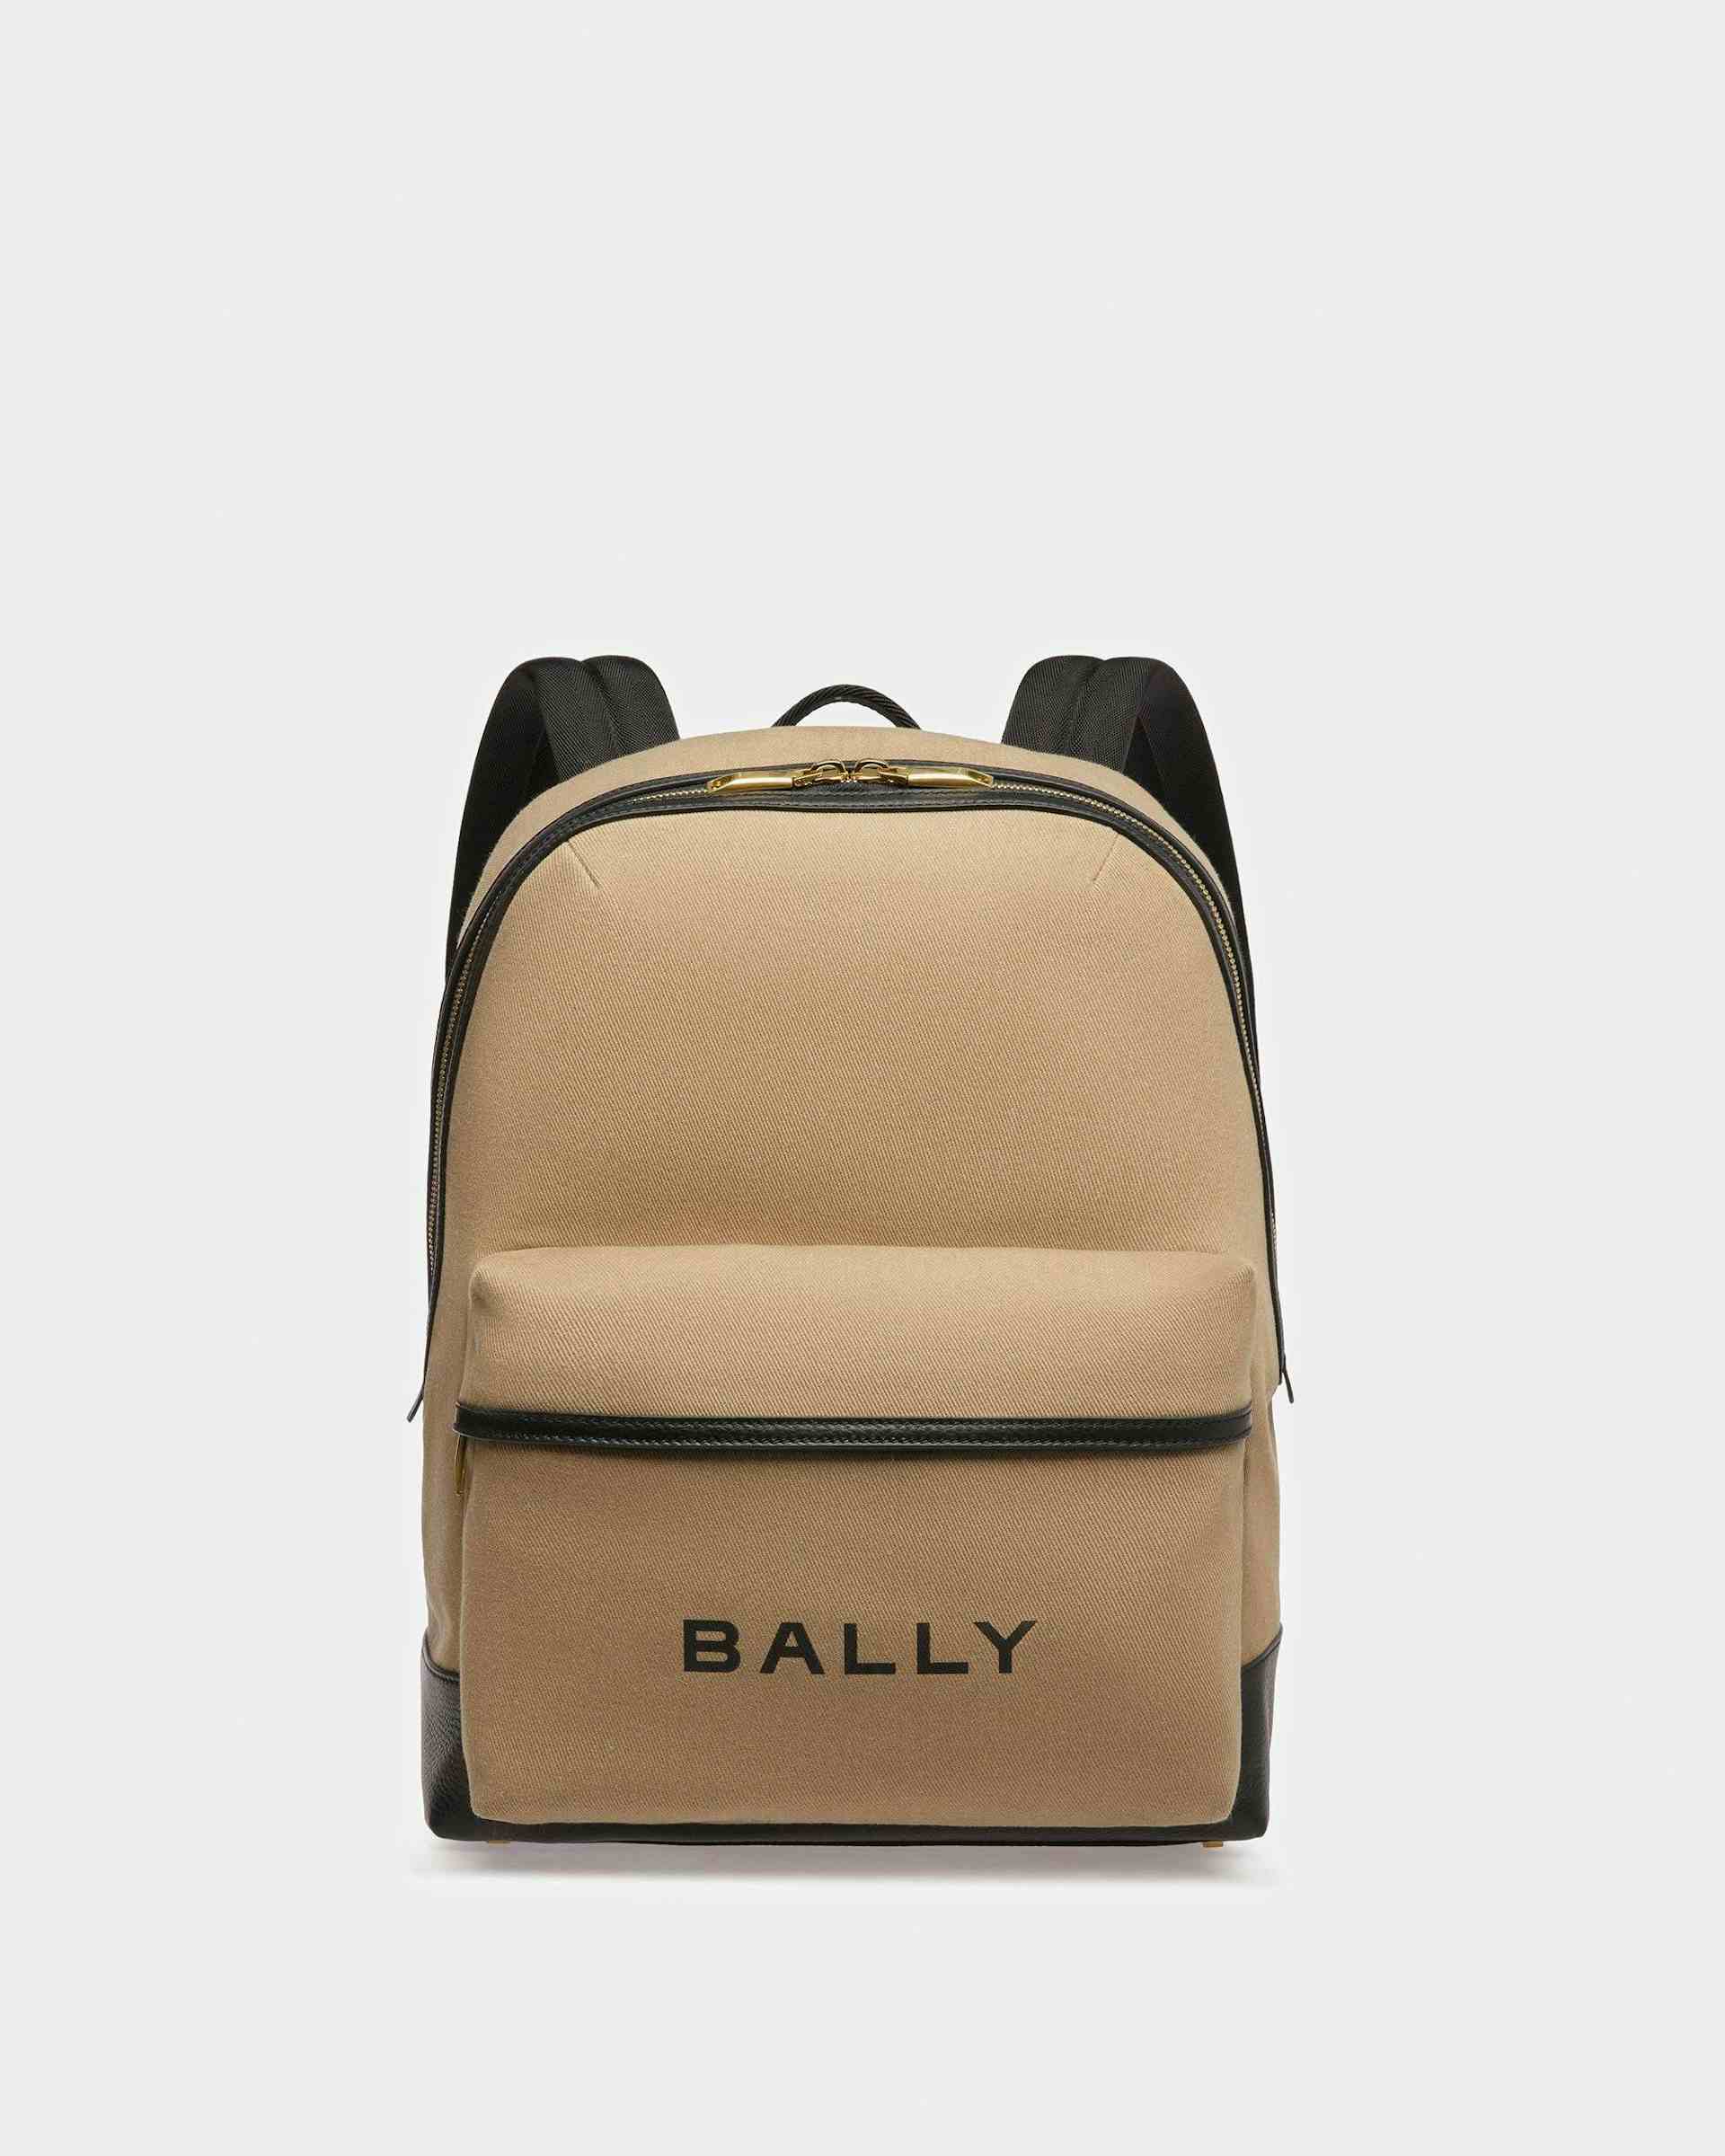 Bar Backpack In Sand And Black Fabric And Leather - Men's - Bally